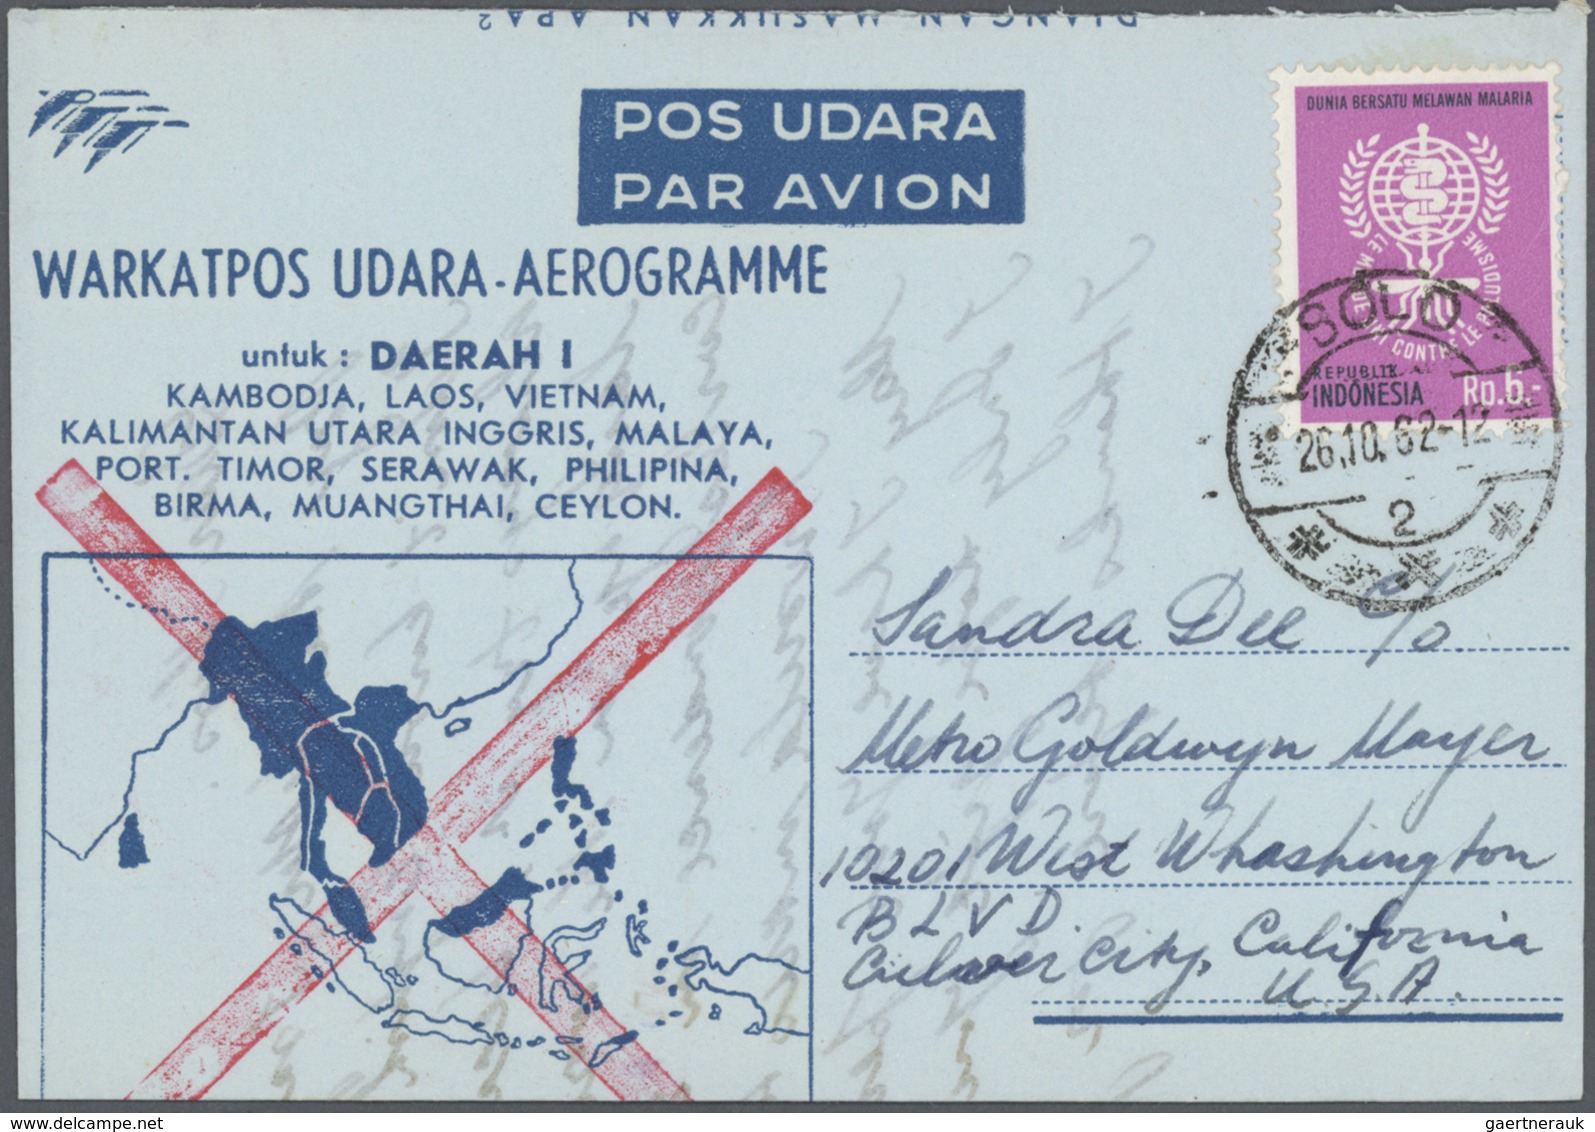 GA Indonesien: 1950/95 (ca.), the enormous stock/research collection of airletters and officially airle